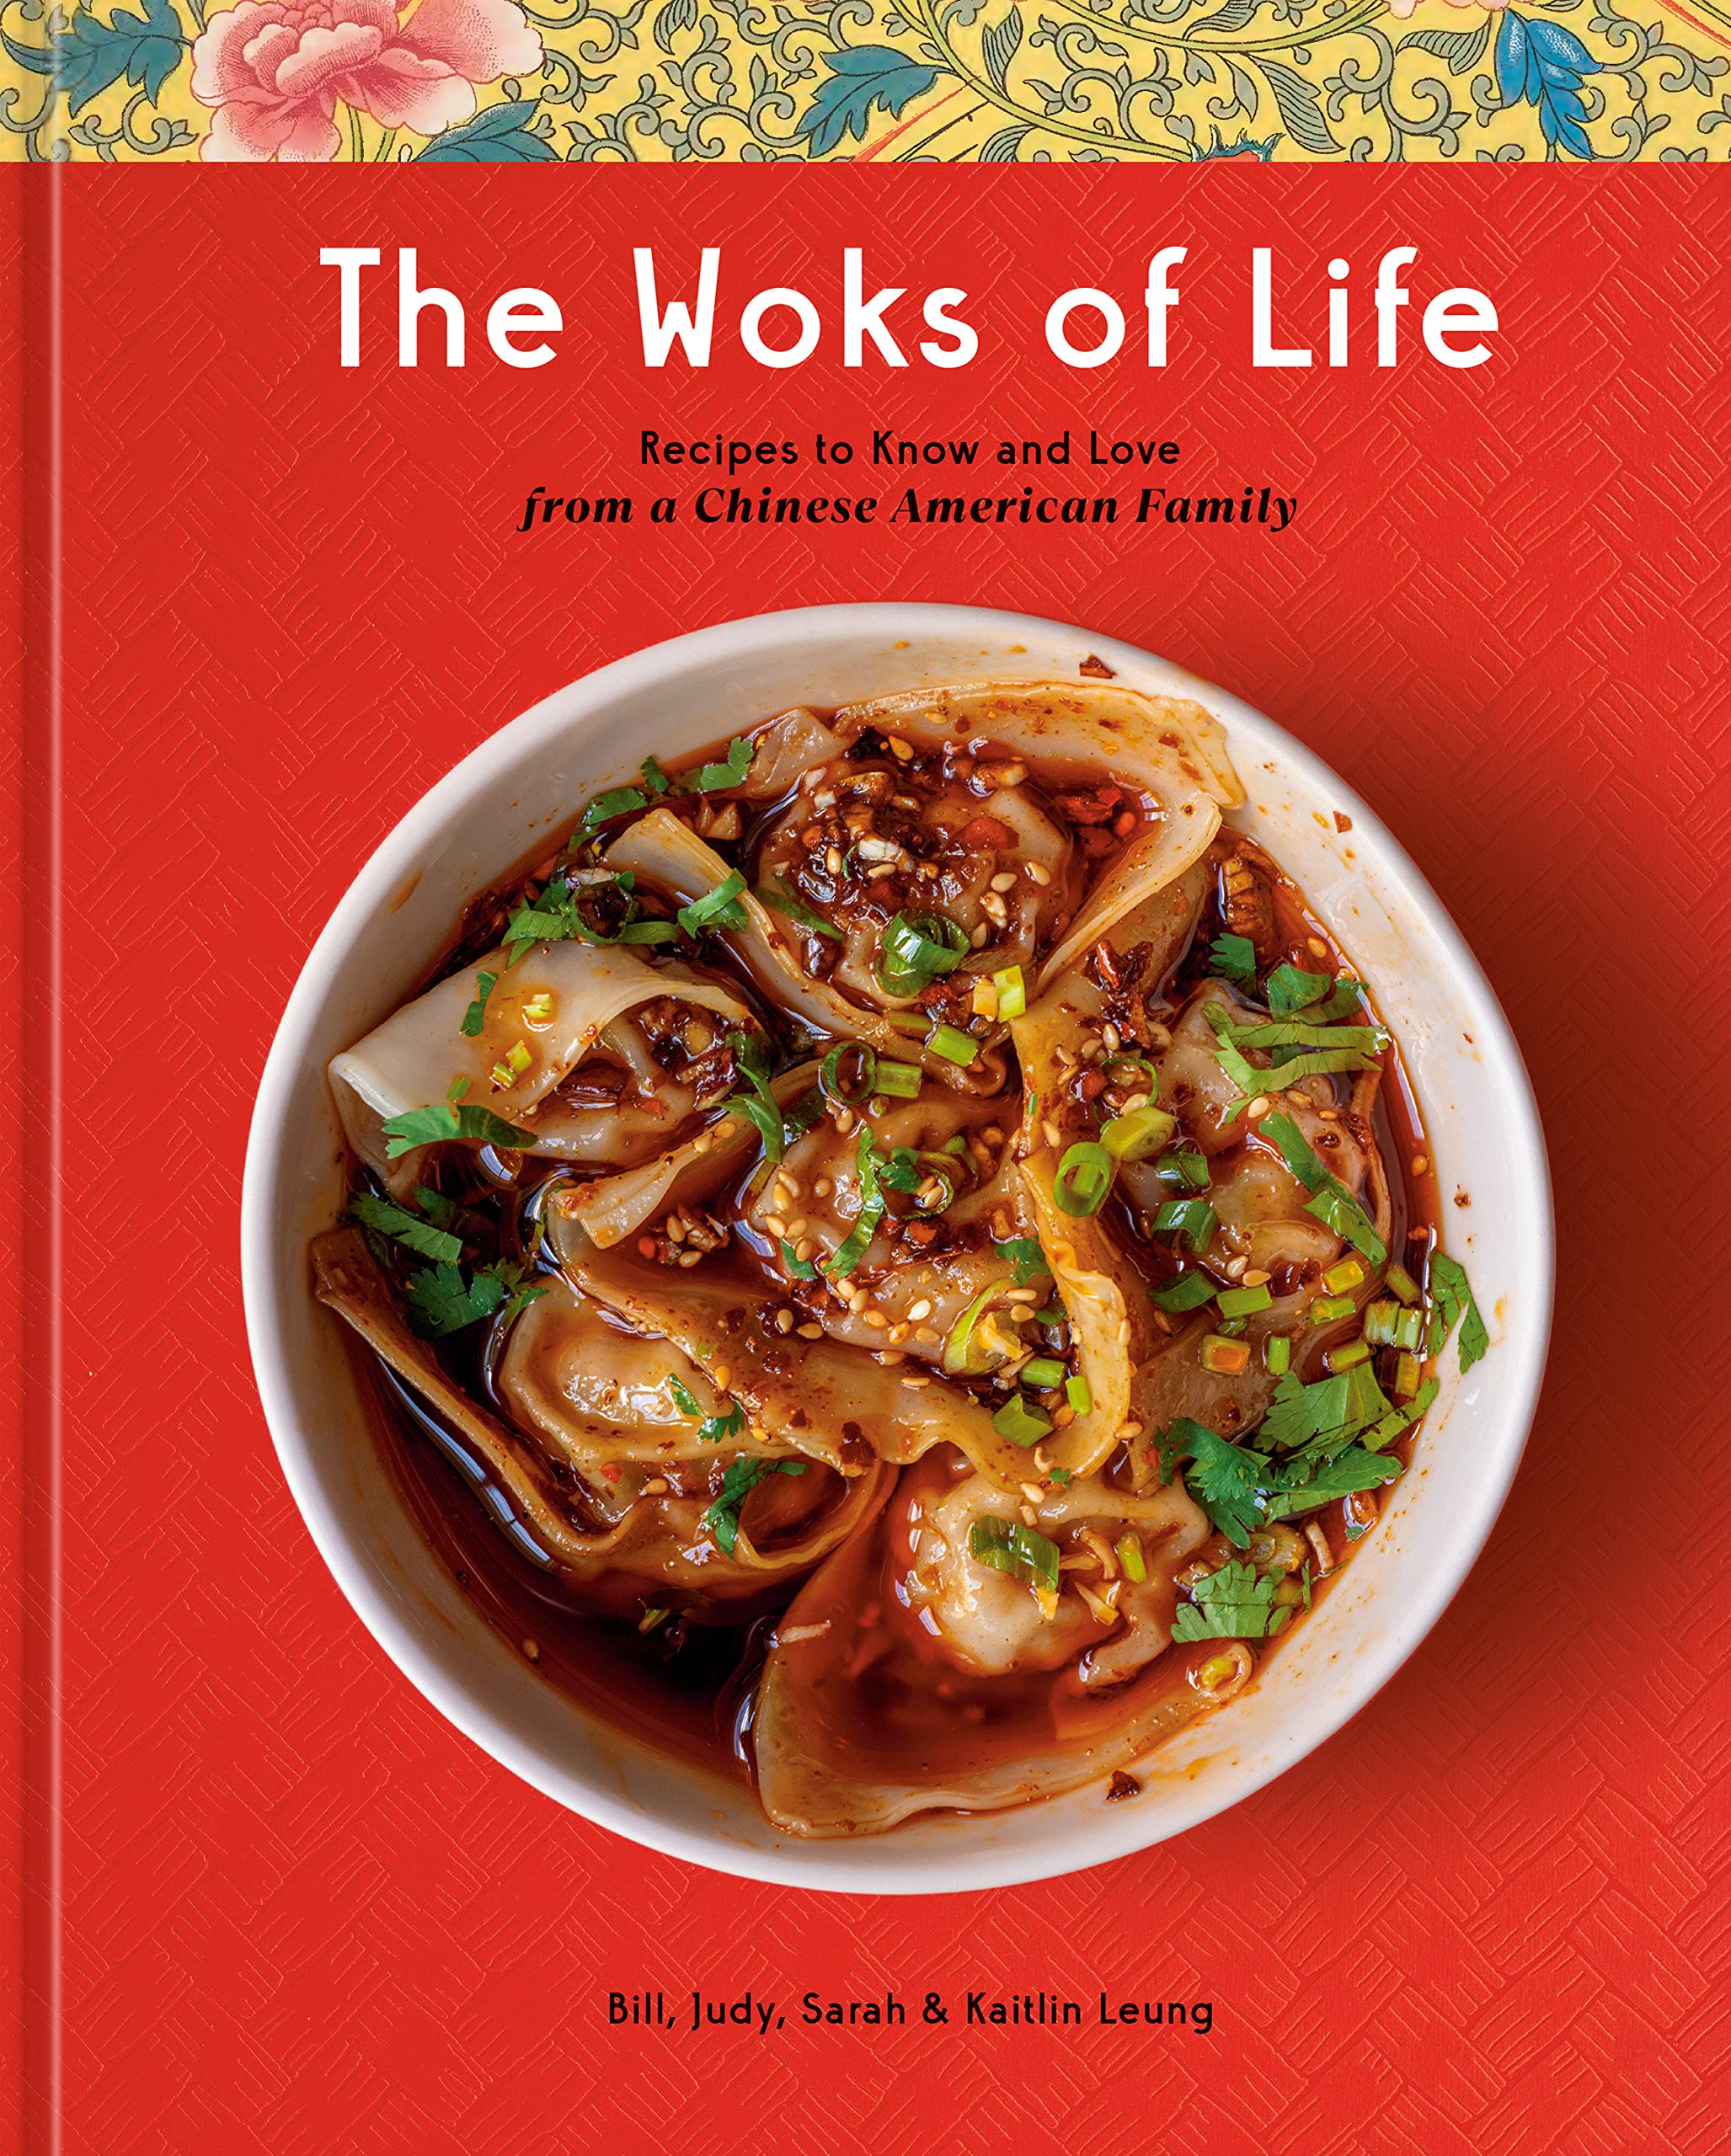 The Woks of Life: Recipes to Know and Love from a Chinese American Family (Bill Leung, Kaitlin Leung, Judy Leung, Sarah Leung) *SIGNED*